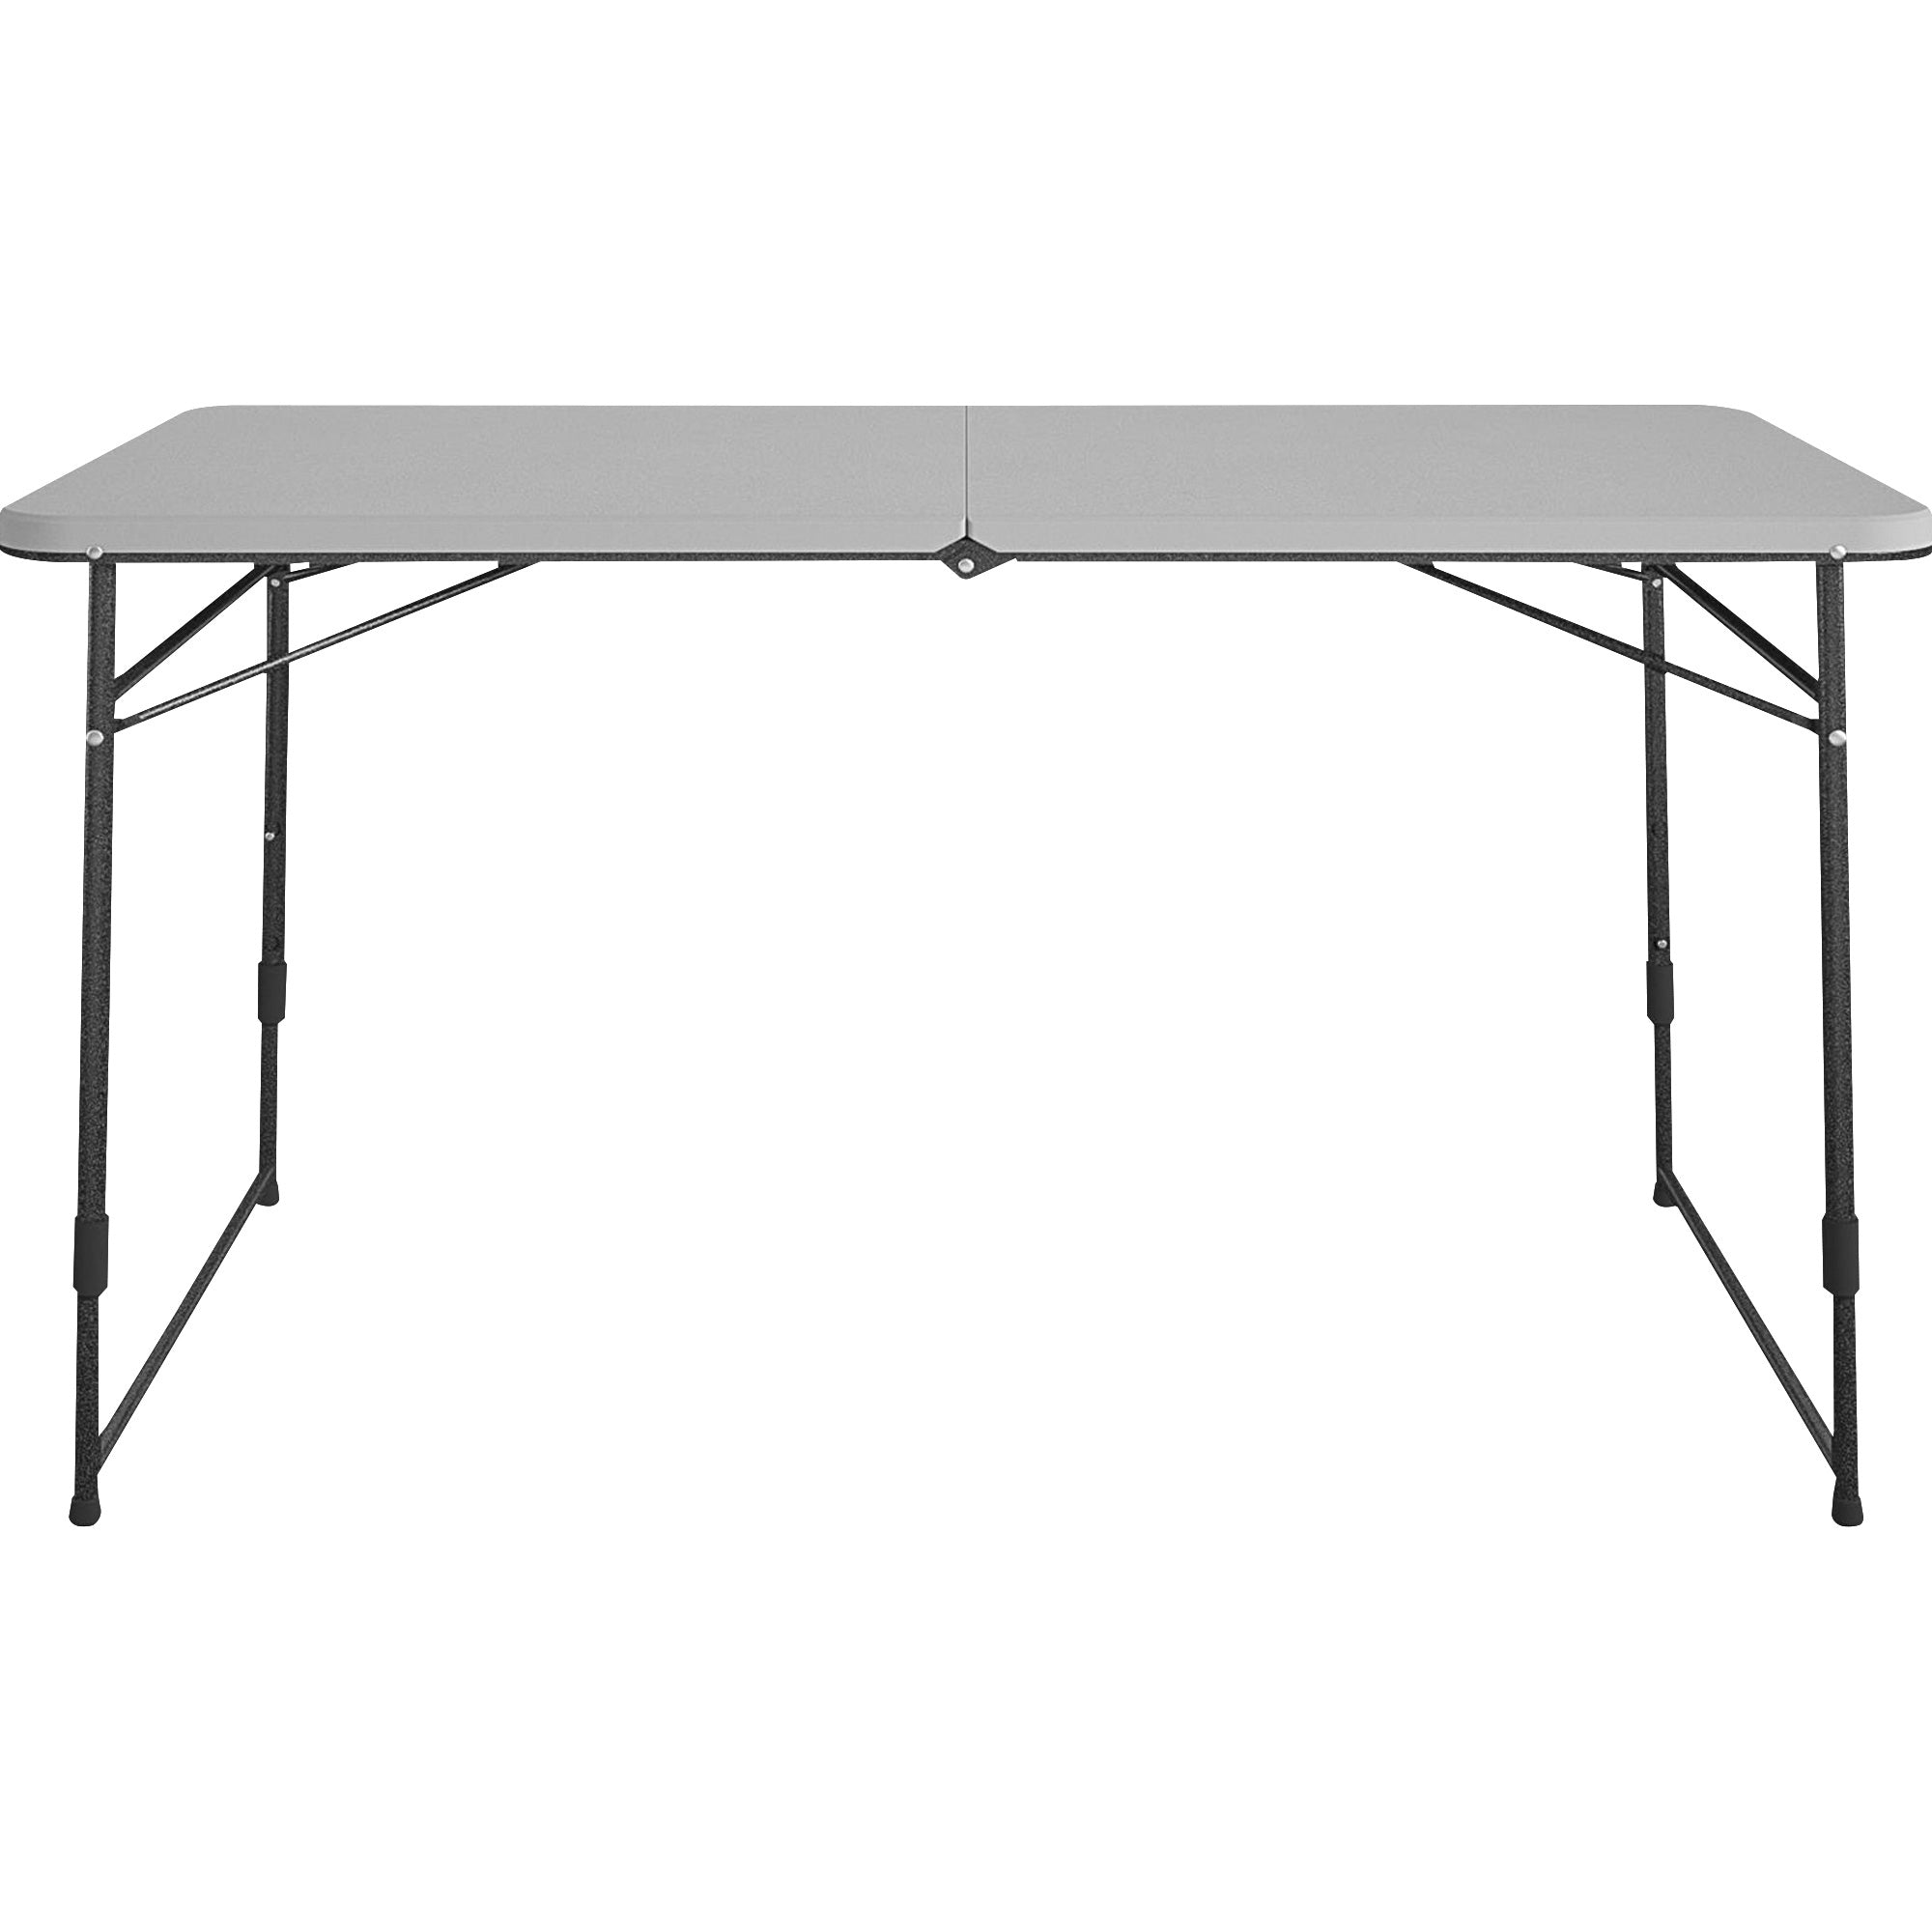 cosco-fold-portable-indoor-outdoor-utility-table-200-lb-capacity-adjustable-height-x-48-table-top-width-x-24-table-top-depth-28-height-gray-steel-resin-1-each_csc14400gry1e - 3